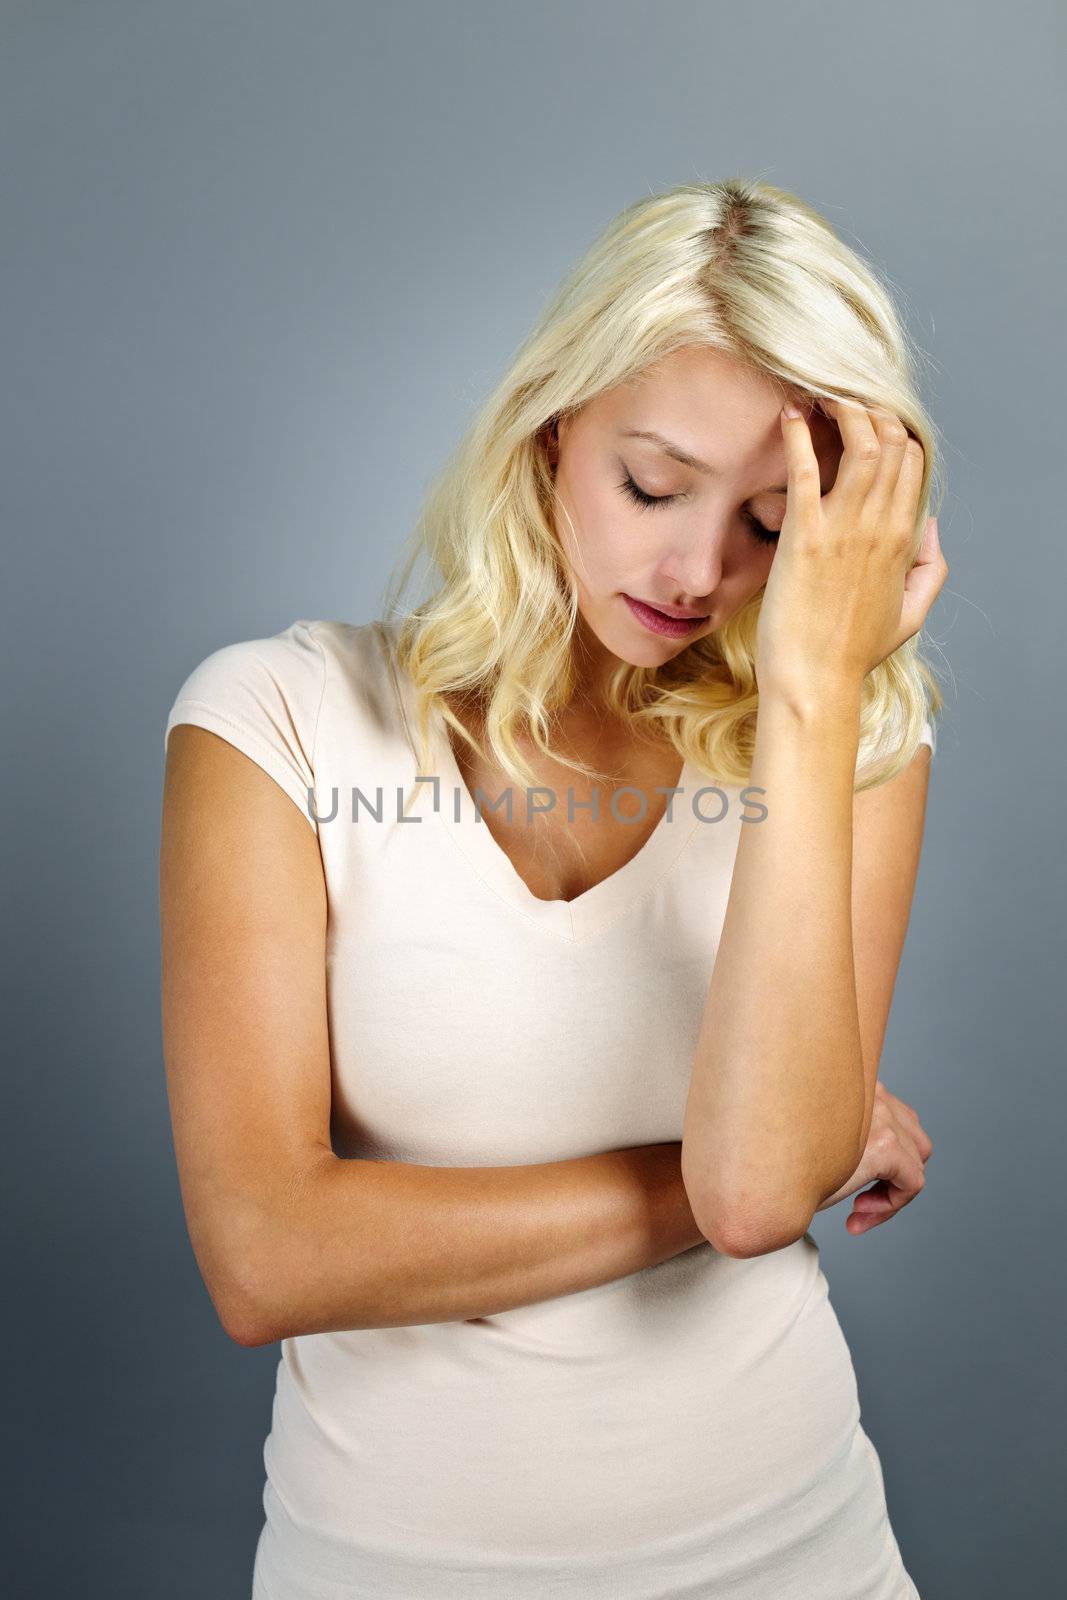 Stressed and worried young blonde woman on grey background